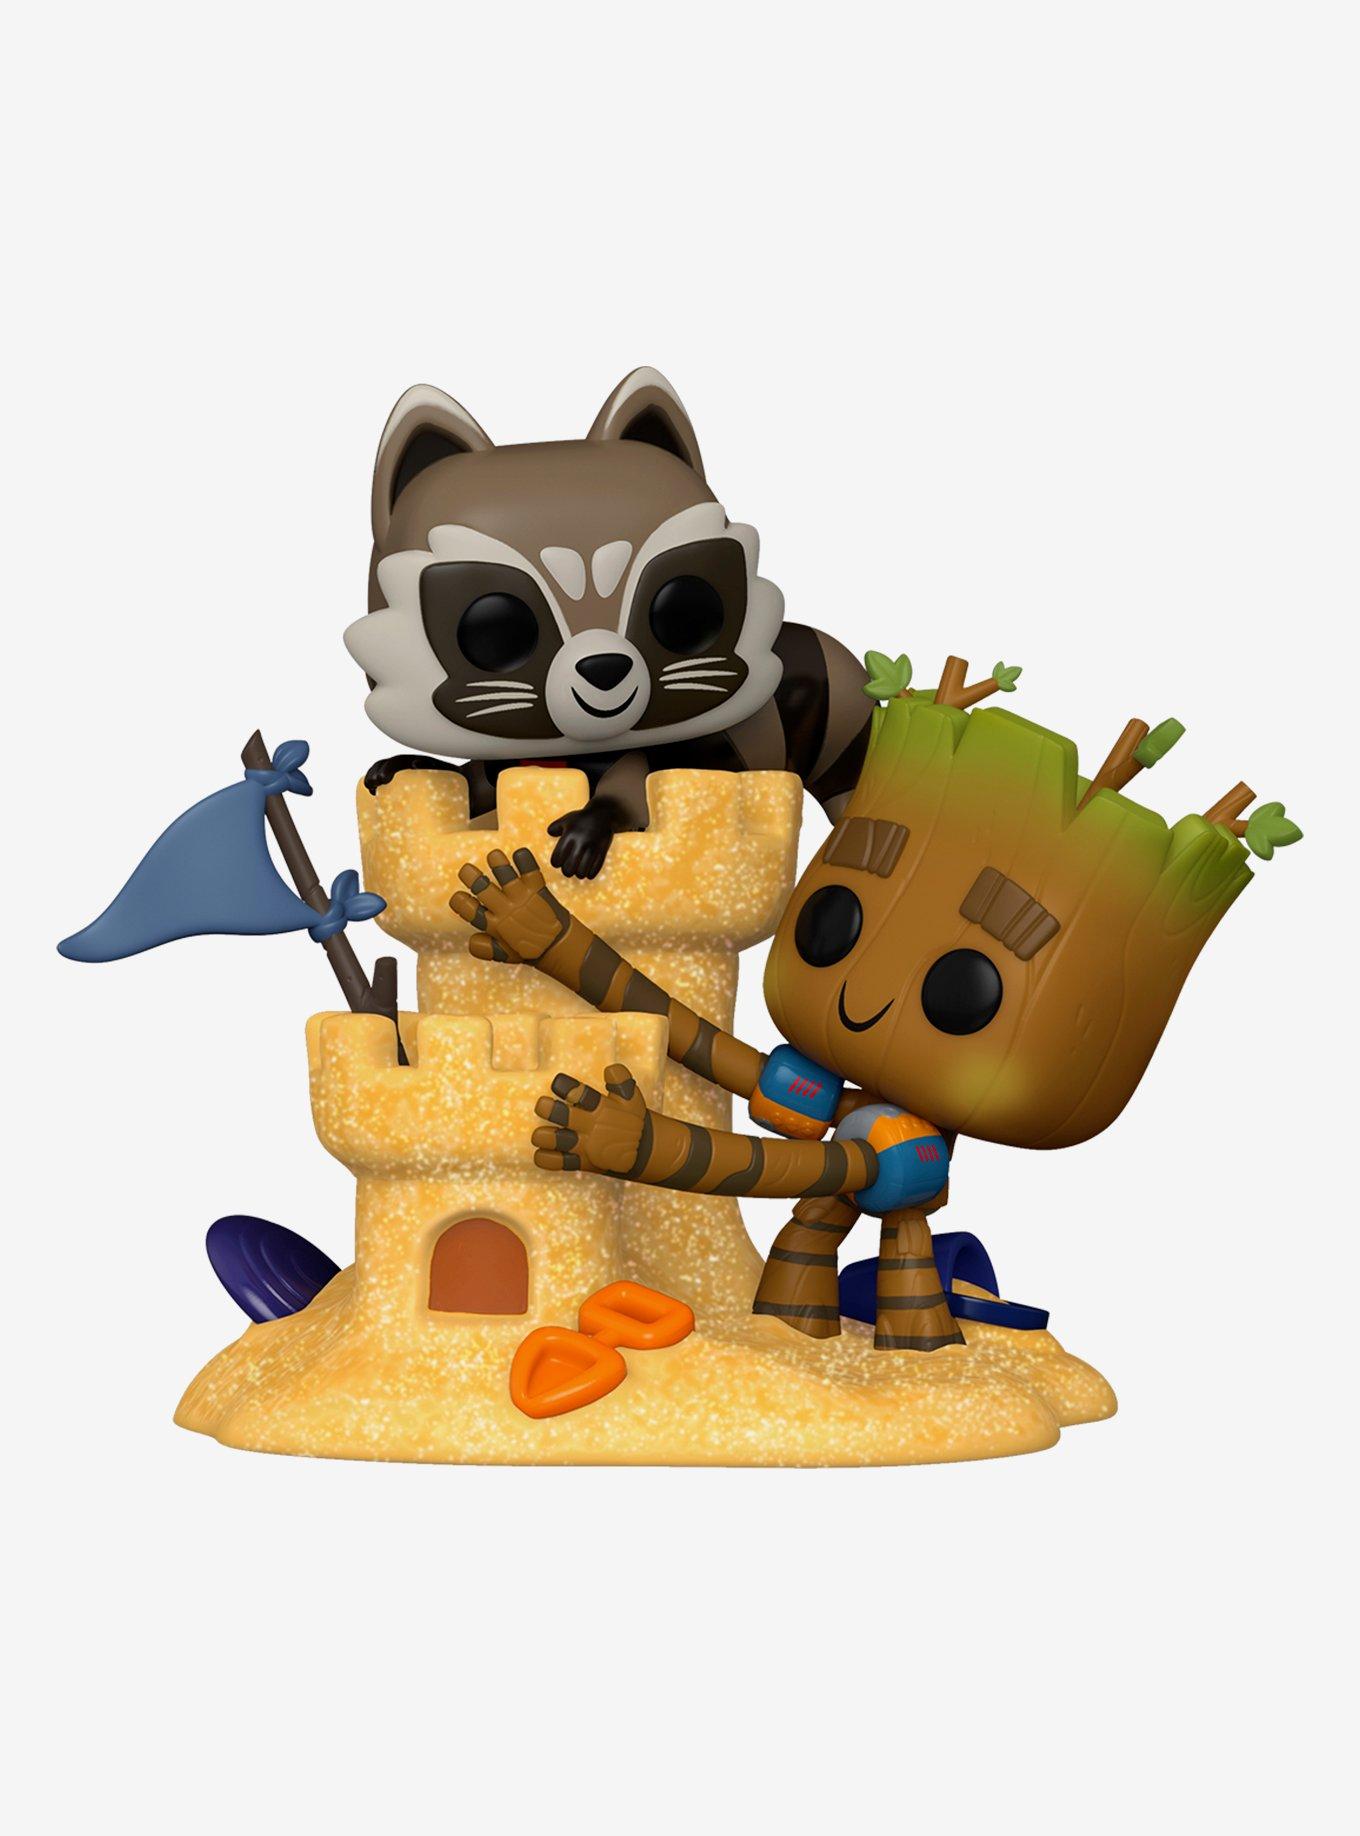  Star-Lord with Groot Exclusive Vinyl Figure : Toys & Games